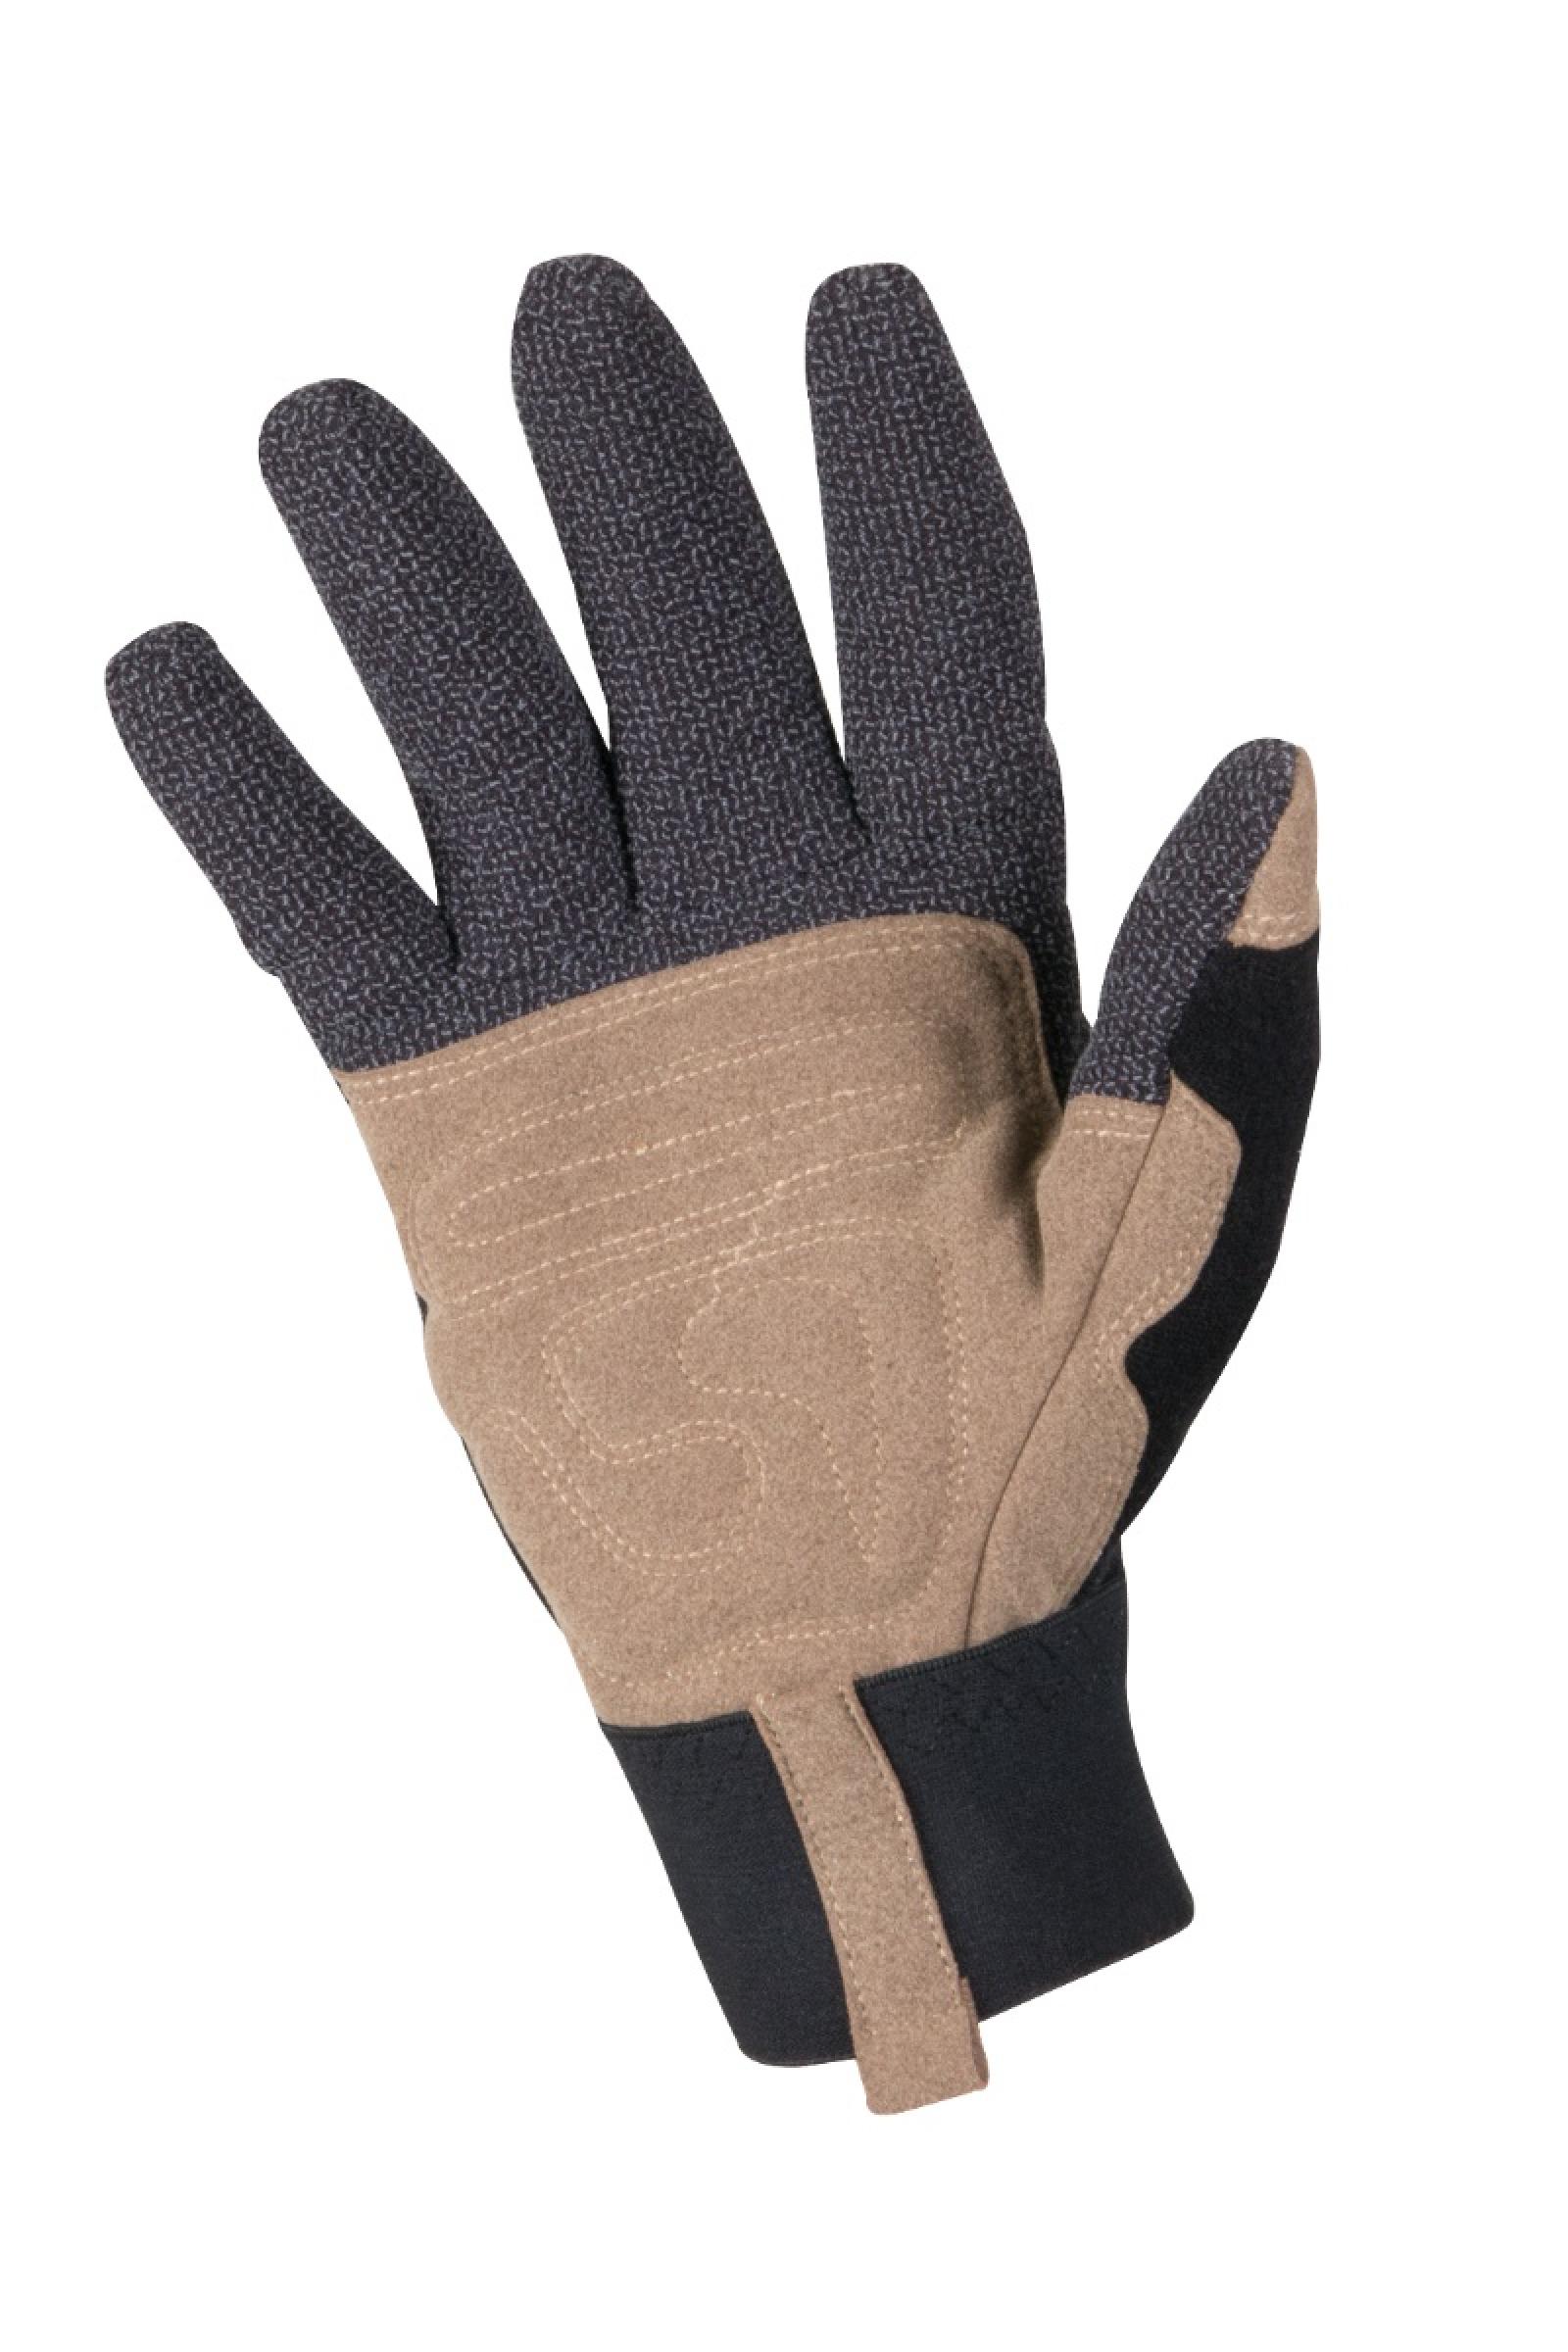    Noble Outfitters Hay Bucker Pro Gloves